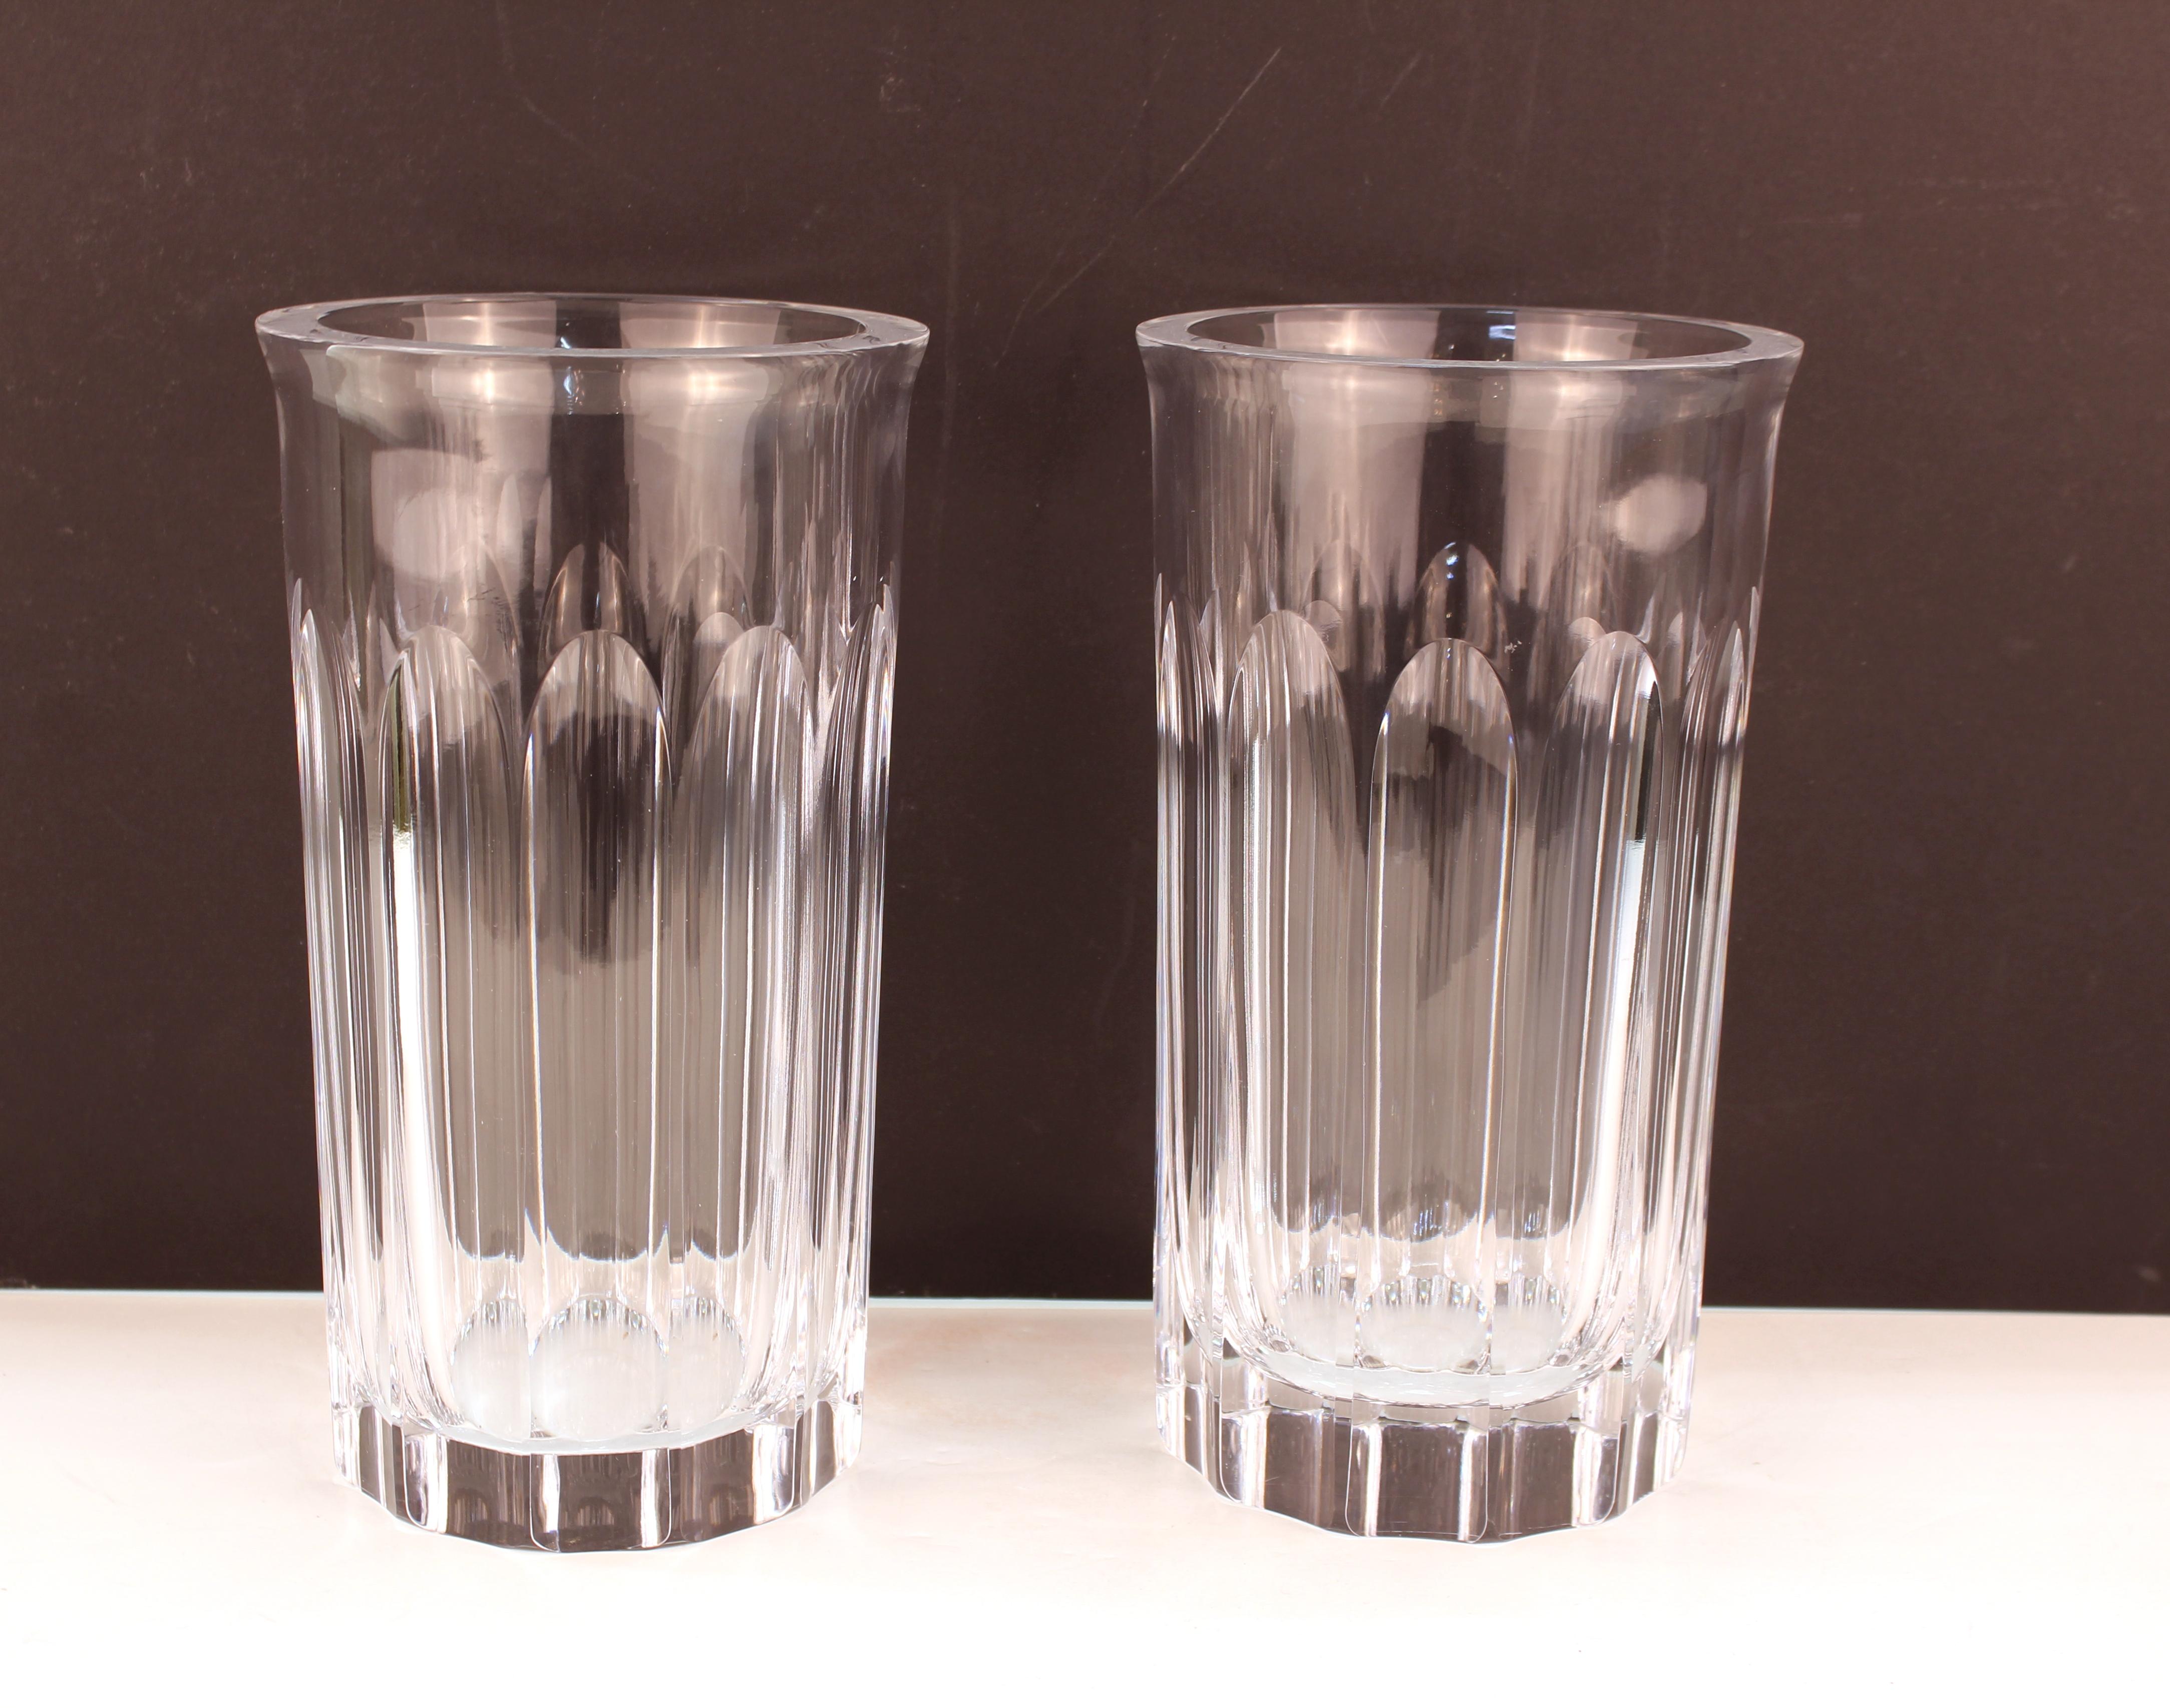 Pair of Mid-Century Modern heavy glass vases made by Orrefors. The pair is marked on the bottom and has numbers. In good vintage condition.